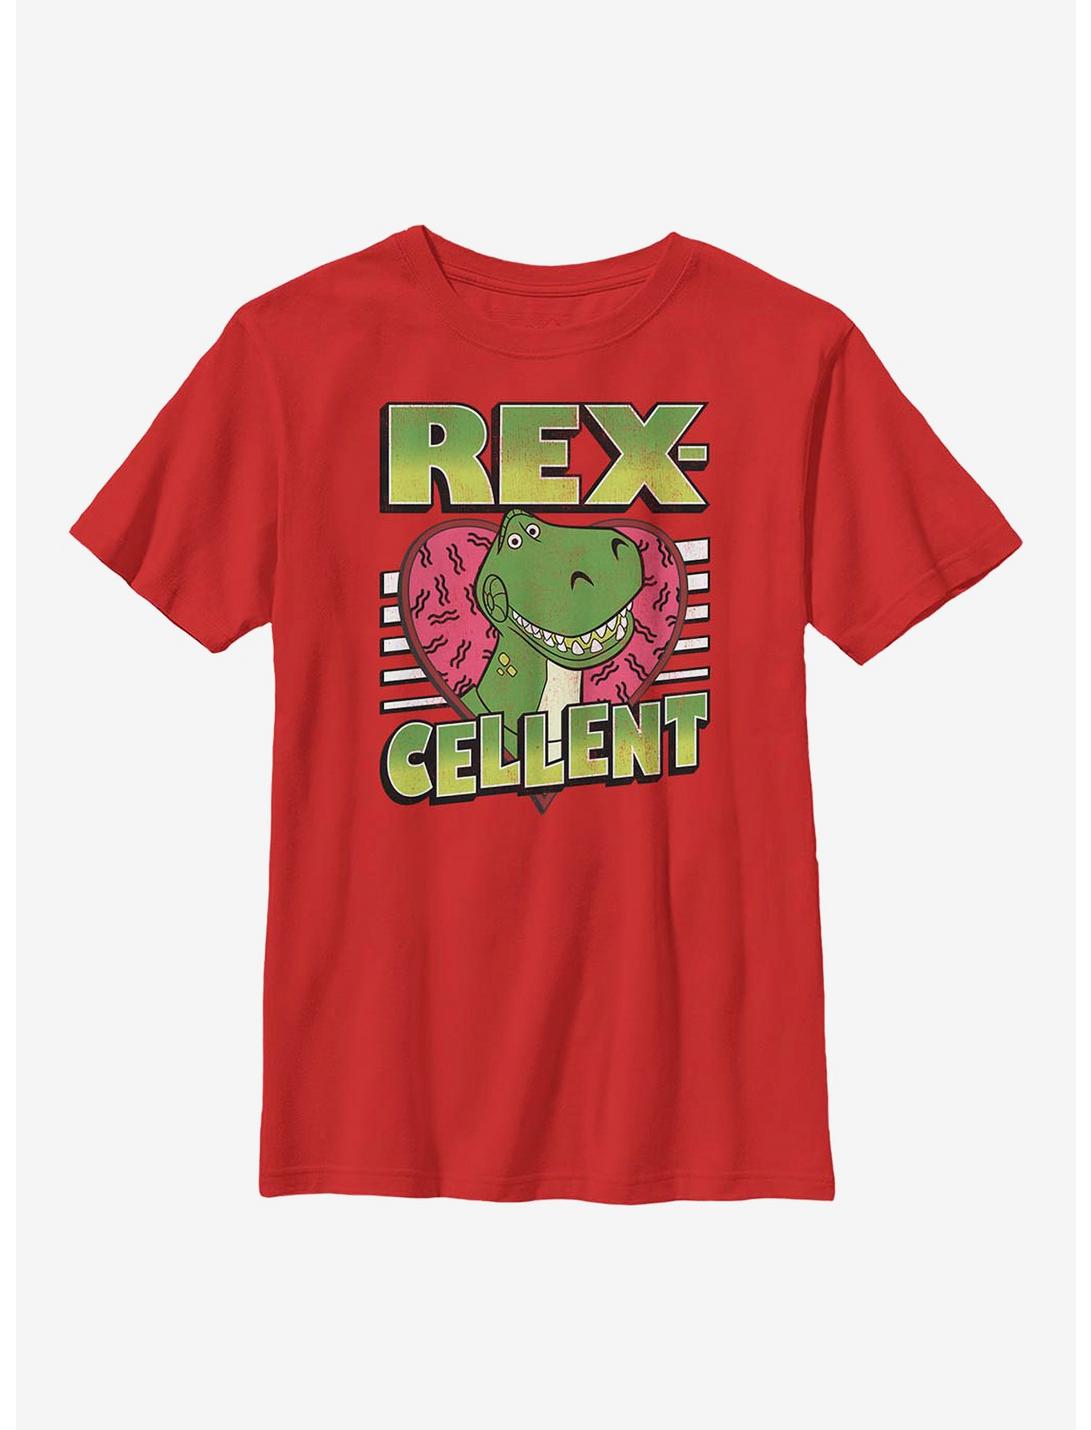 Disney Pixar Toy Story Rexcellent Heart Youth T-Shirt, RED, hi-res